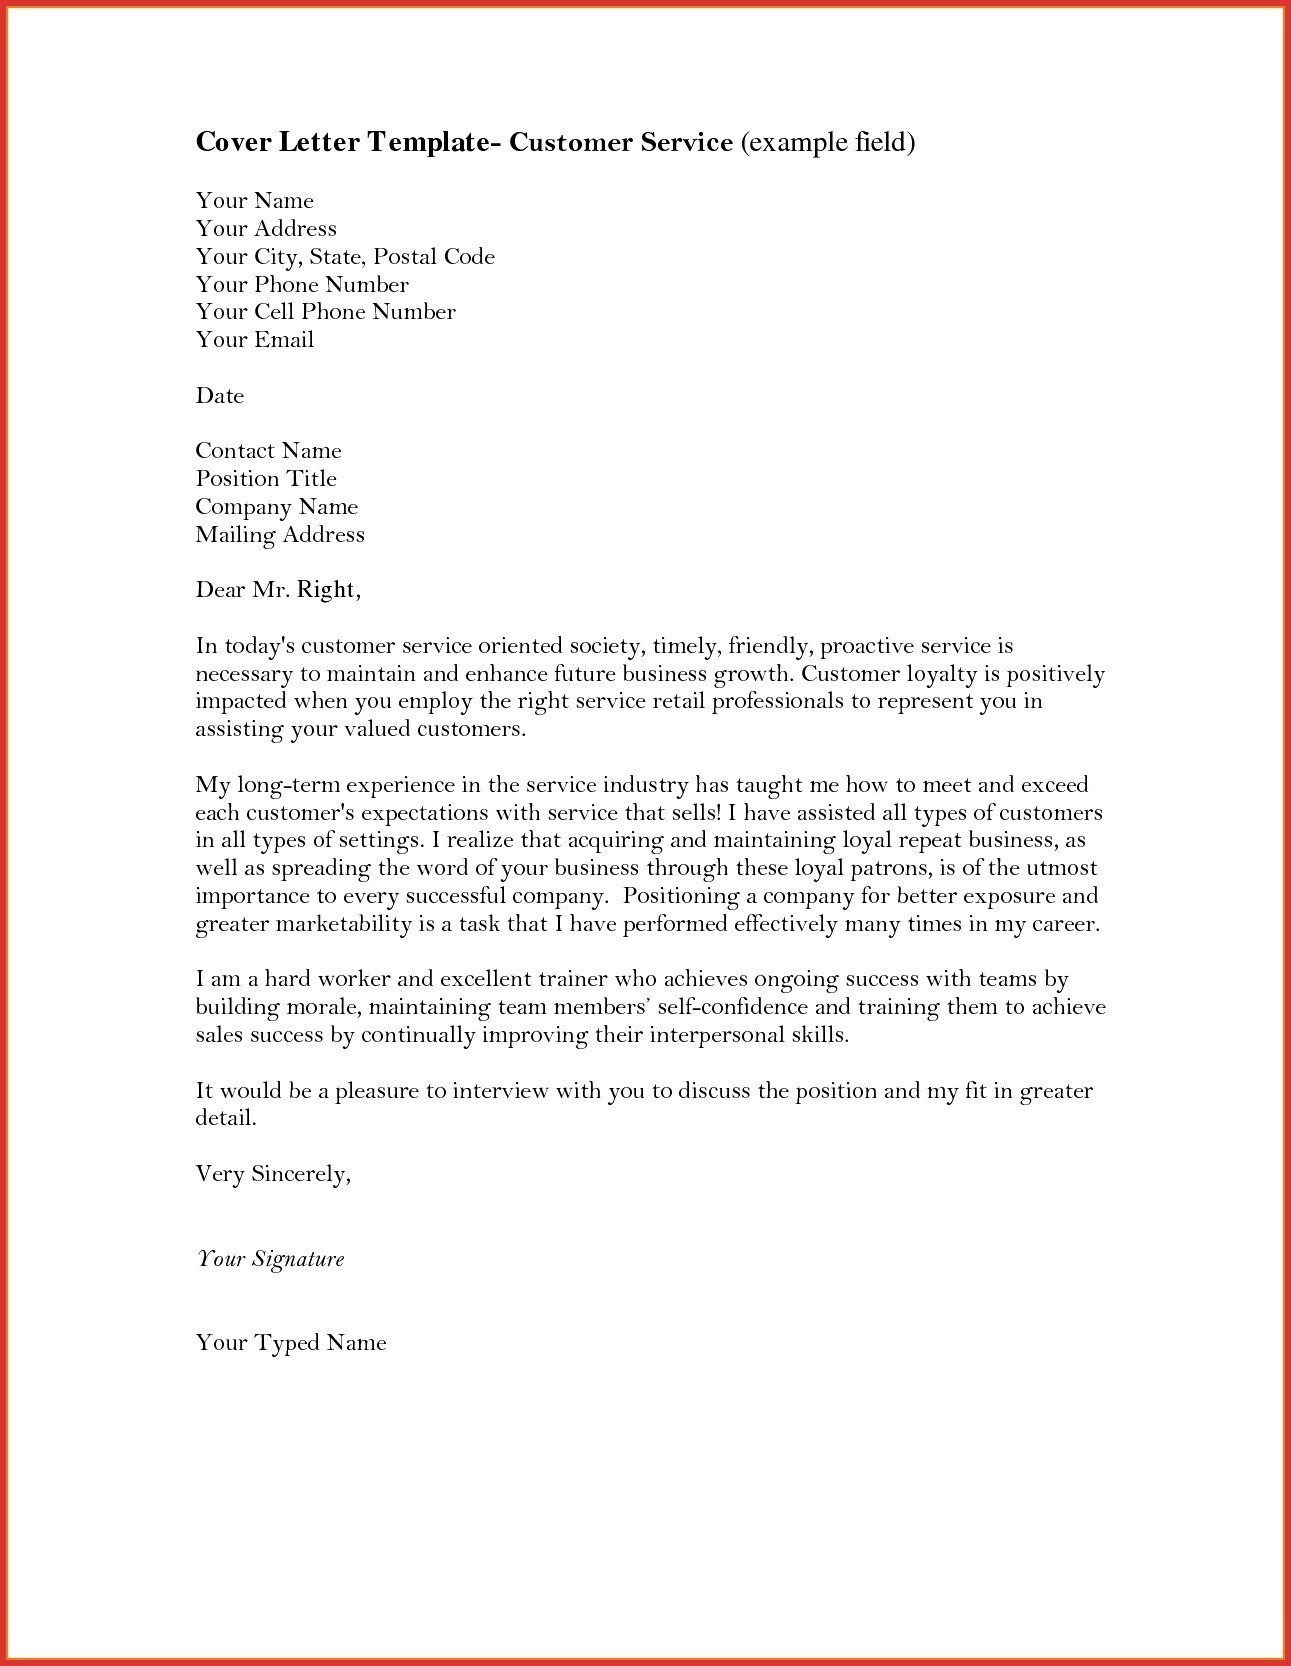 Sales Letter Template Promoting A Service - Service Letter format Examples Save Letter format for Request for